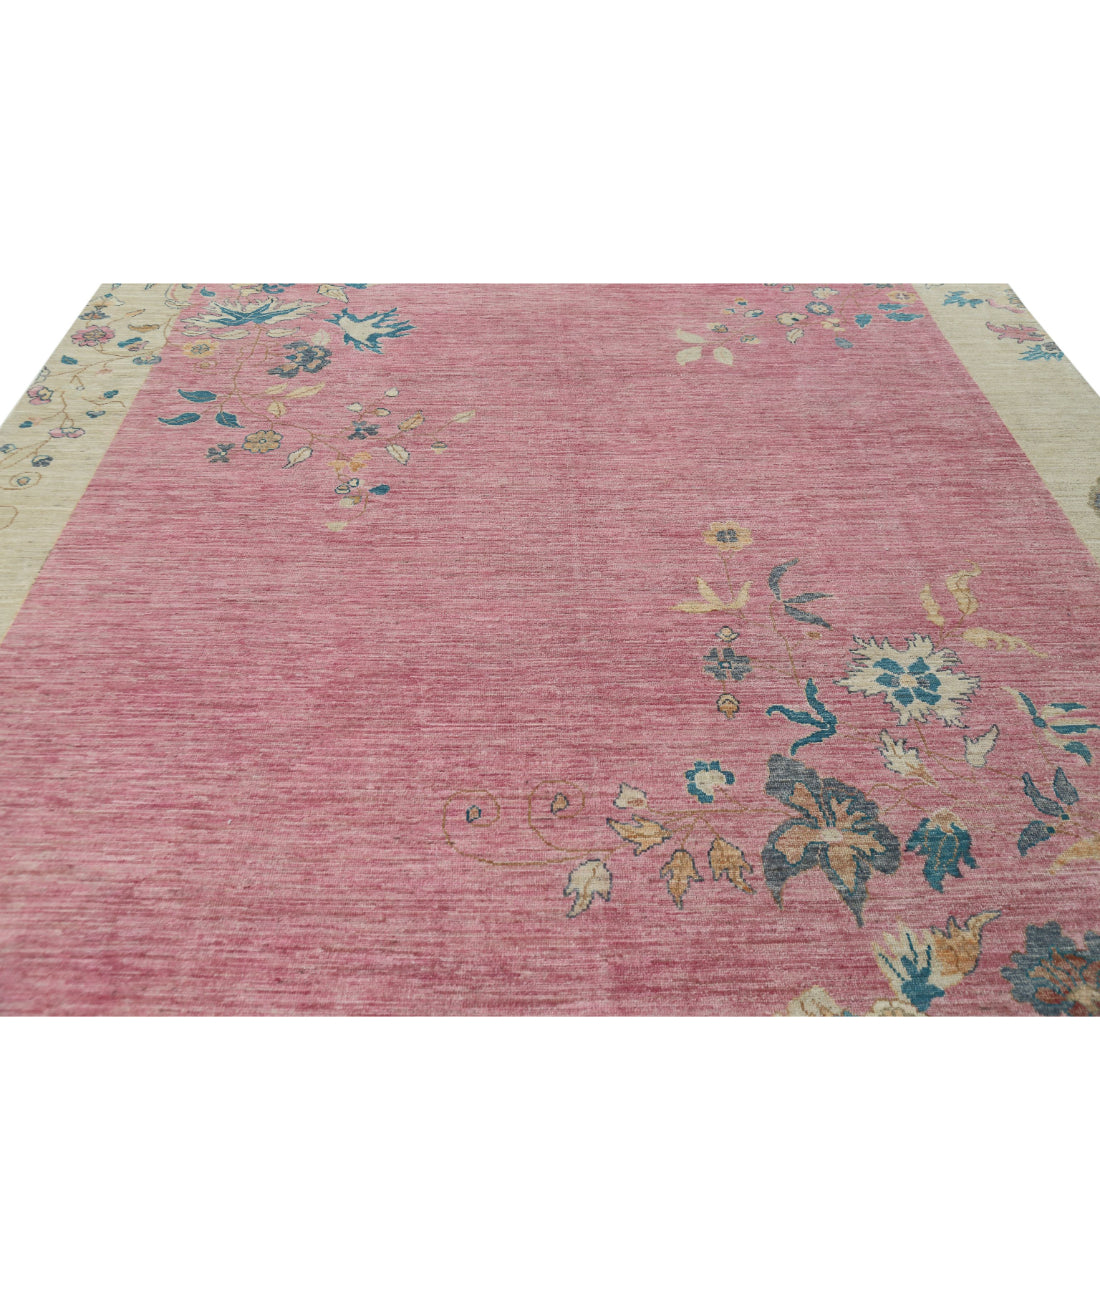 Hand Knotted Chinese Wool Rug - 9'2'' x 11'10'' 9'2'' x 11'10'' (275 X 355) / Ivory / Pink